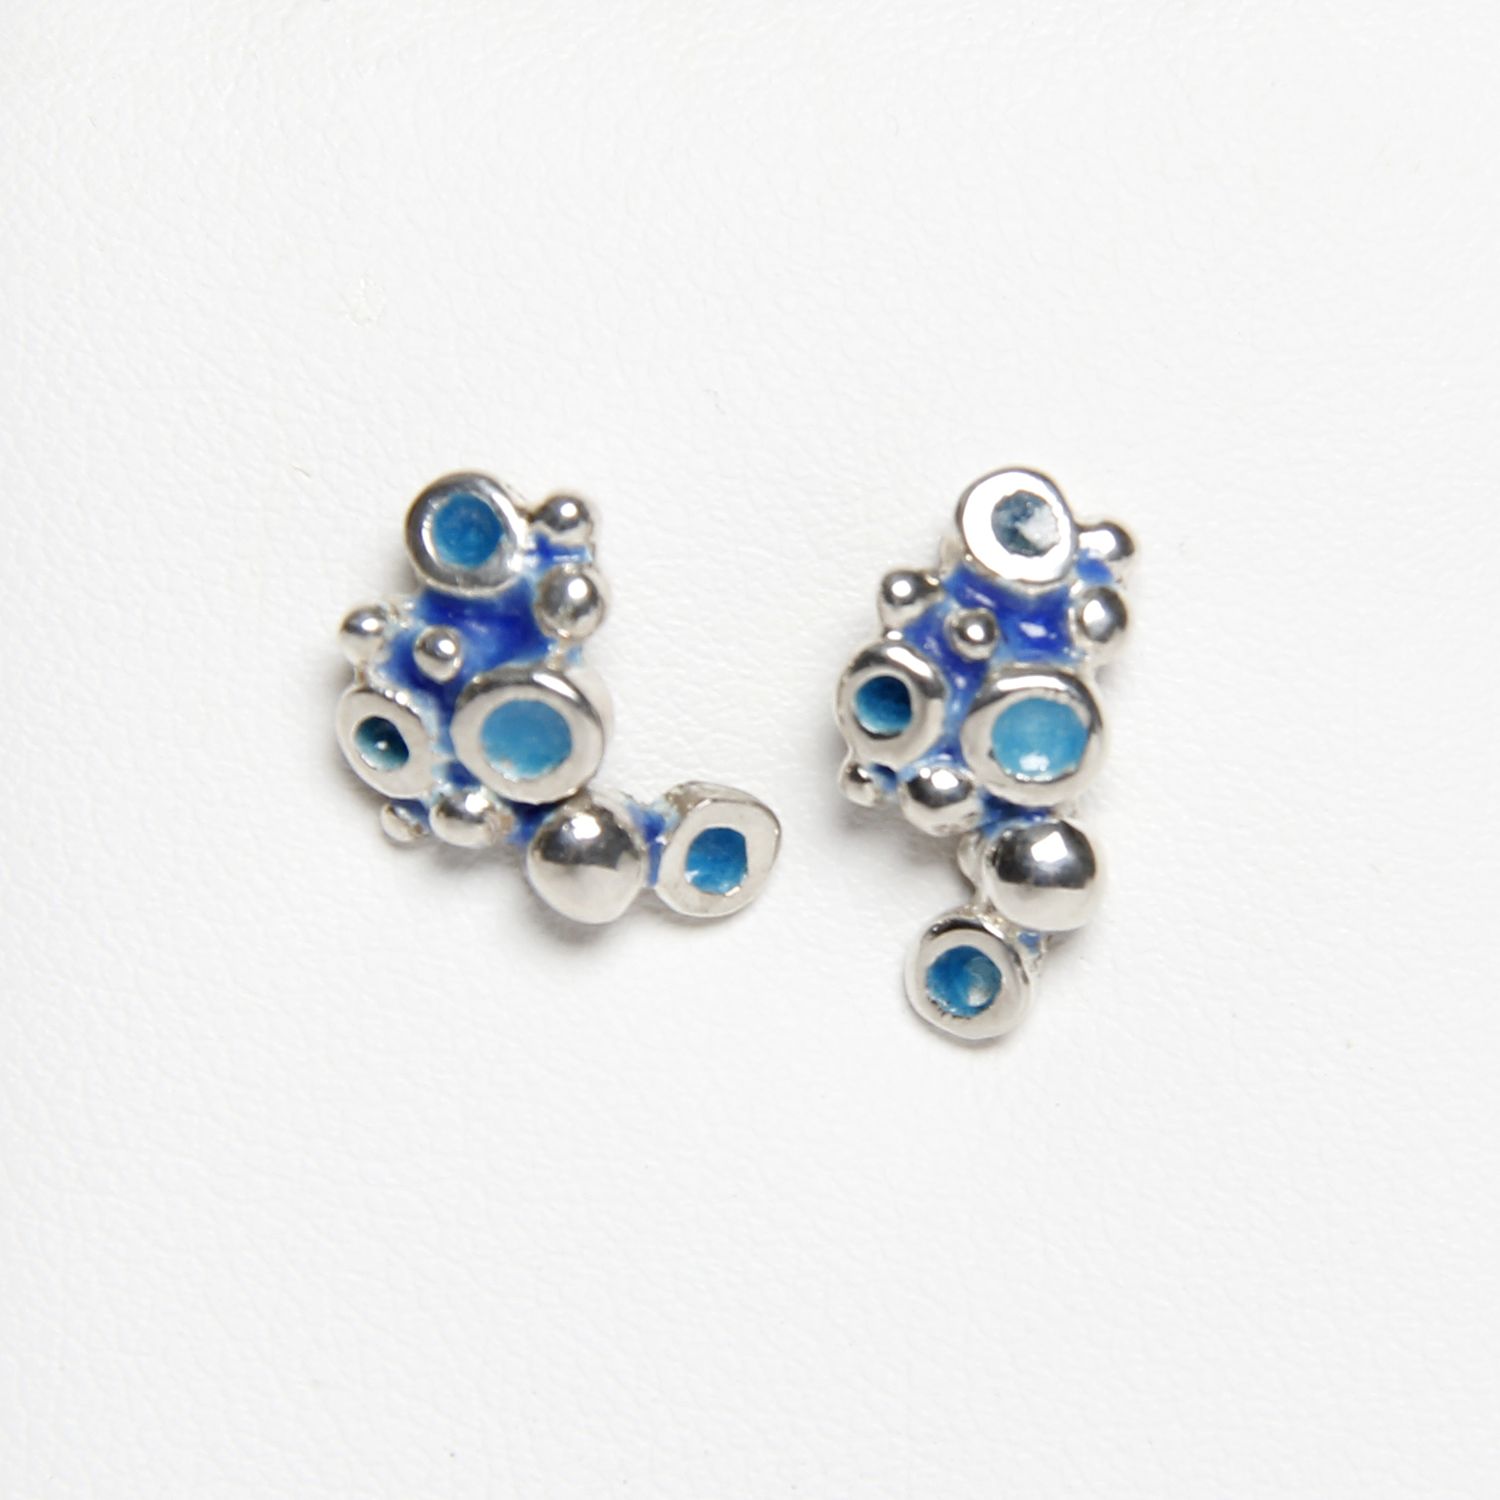 Cinelli Maillet: Seltzer Earrings in Nitric and Turquoise Product Image 1 of 2